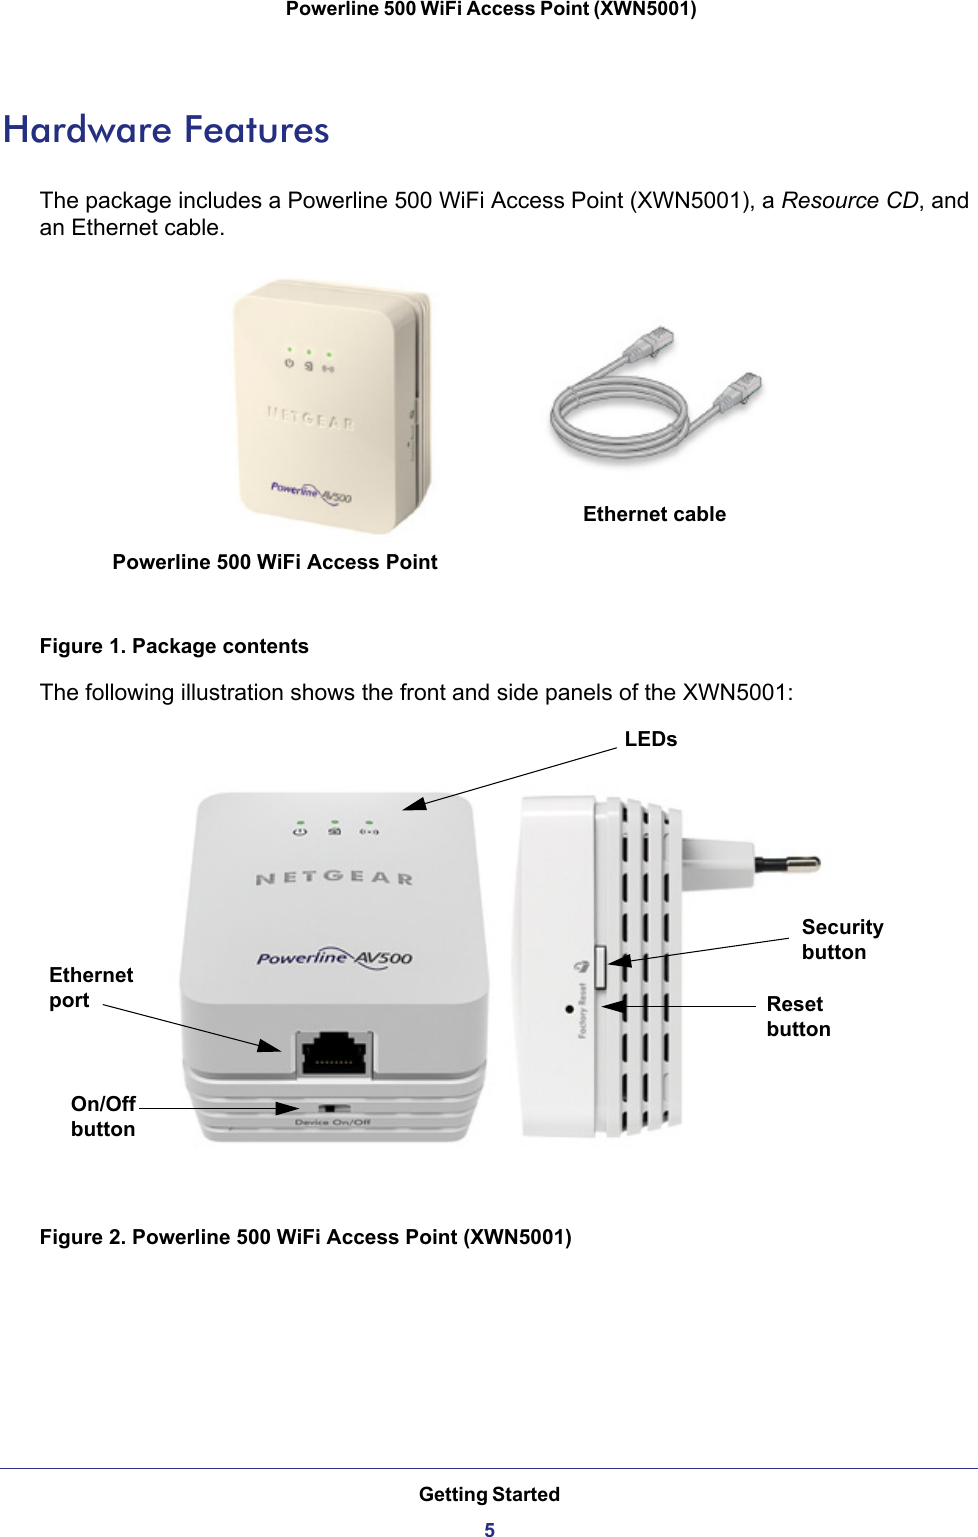 Getting Started5 Powerline 500 WiFi Access Point (XWN5001)Hardware FeaturesThe package includes a Powerline 500 WiFi Access Point (XWN5001), a Resource CD, and an Ethernet cable.Powerline 500 WiFi Access PointEthernet cableFigure 1. Package contentsThe following illustration shows the front and side panels of the XWN5001: LEDsSecurity buttonReset buttonOn/Off buttonEthernetportFigure 2. Powerline 500 WiFi Access Point (XWN5001)